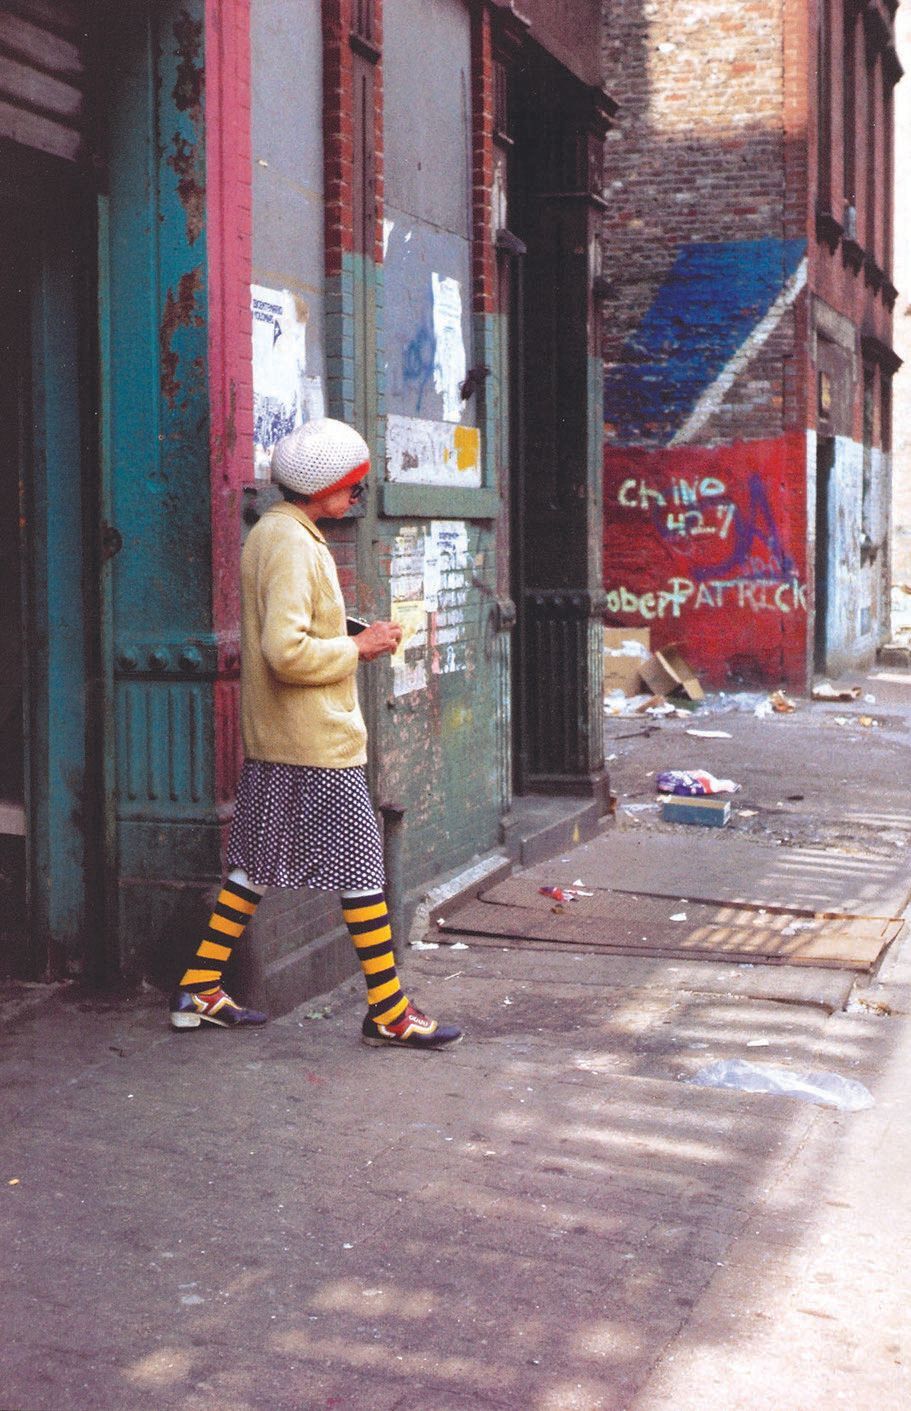 Helen Levitt, “New York,” 1977 PHOTO: COURTESY OF THE MARGULIES COLLECTION AT THE WAREHOUSE